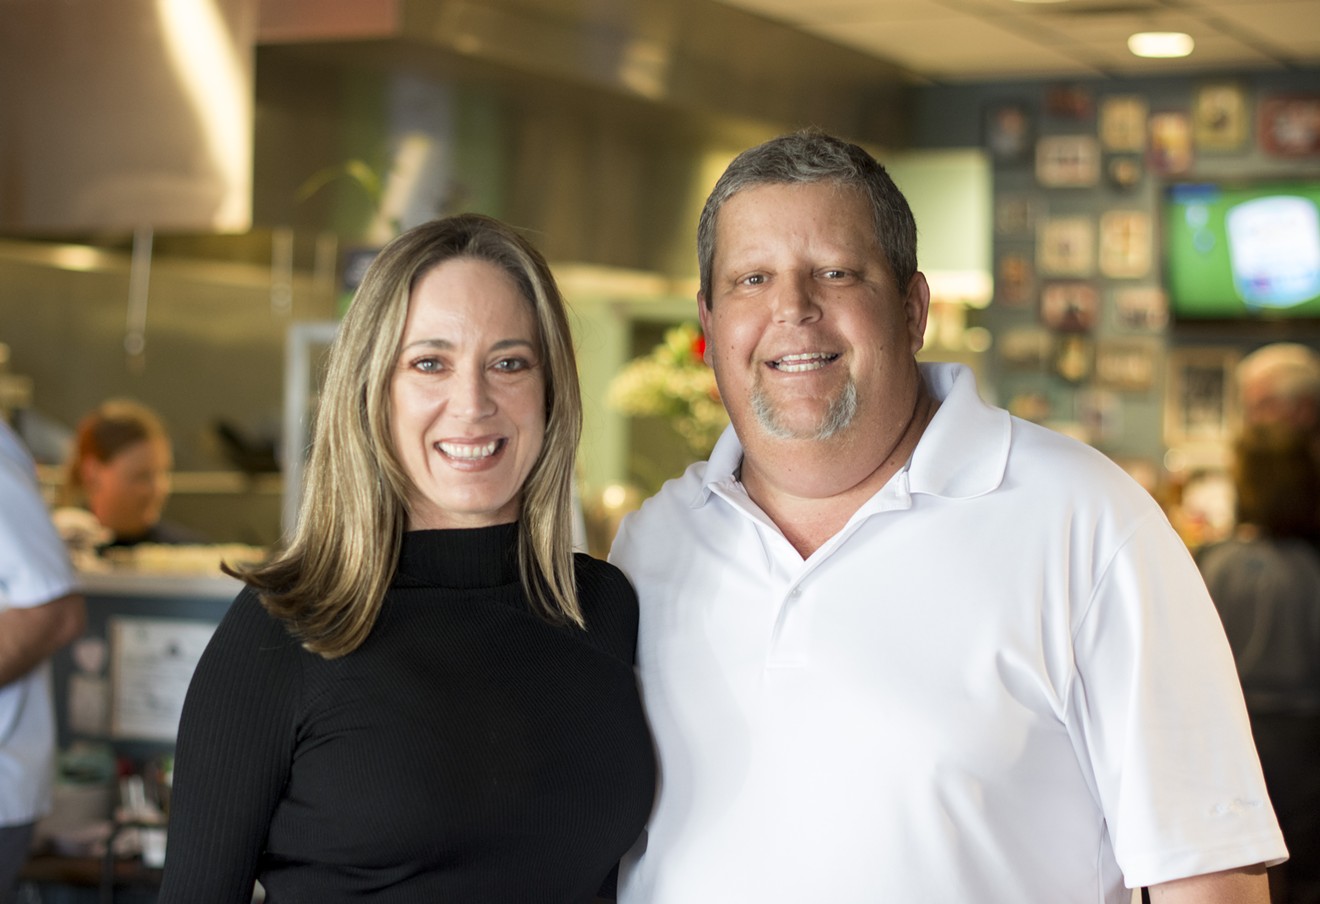 Jennifer Caraway and Mike La Brasca stand in The Joy Bus Diner. La Brasca volunteers for the organization founded by Caraway, delivering meals to homebound cancer patients once a week.